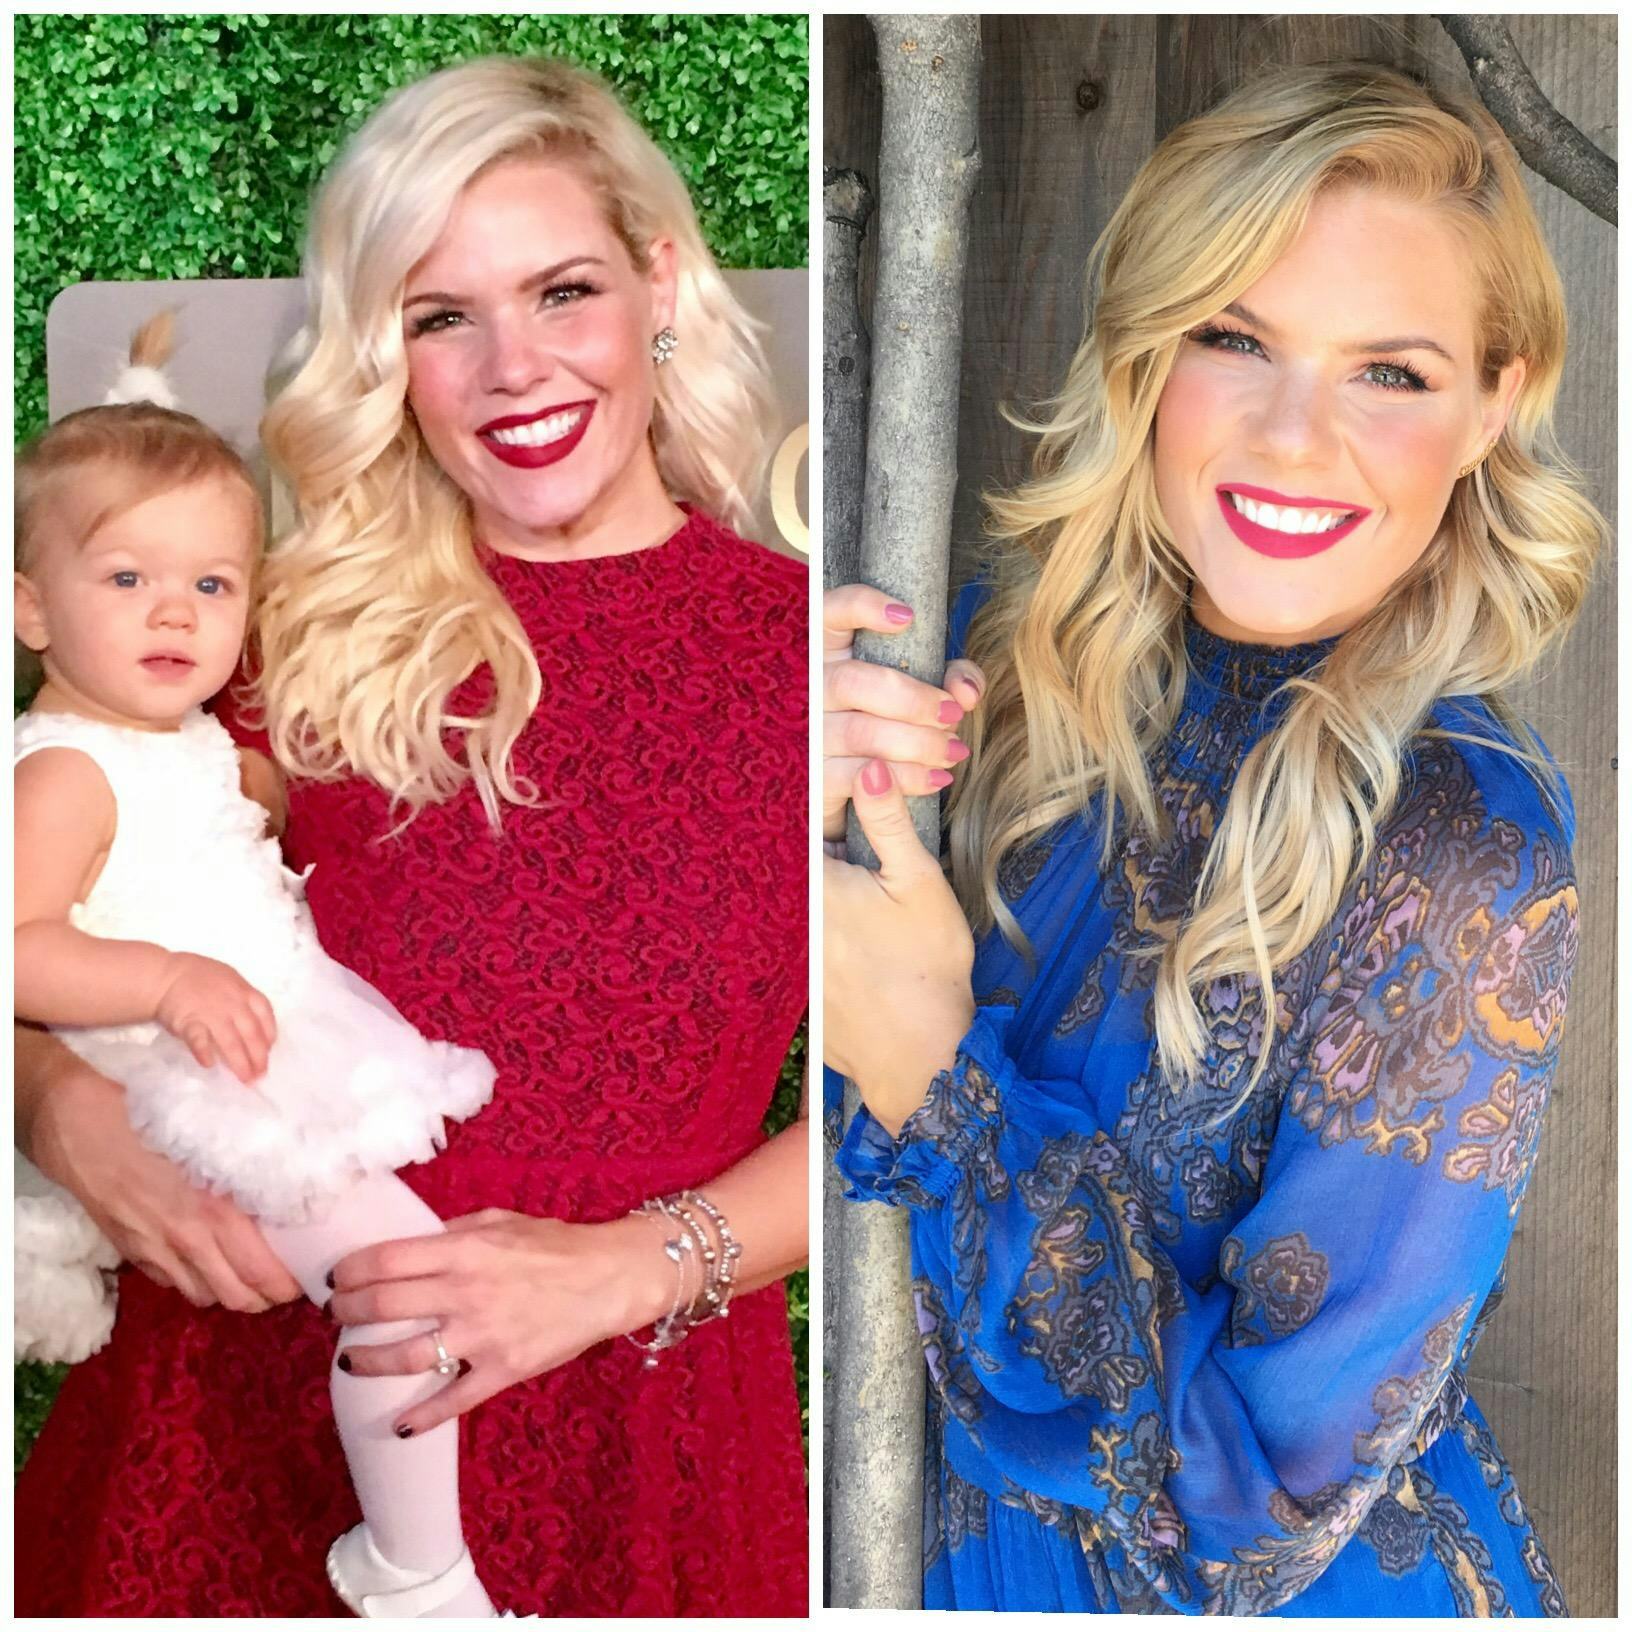 Kimberly Caldwell shows her Sicily Blonde Hair Color